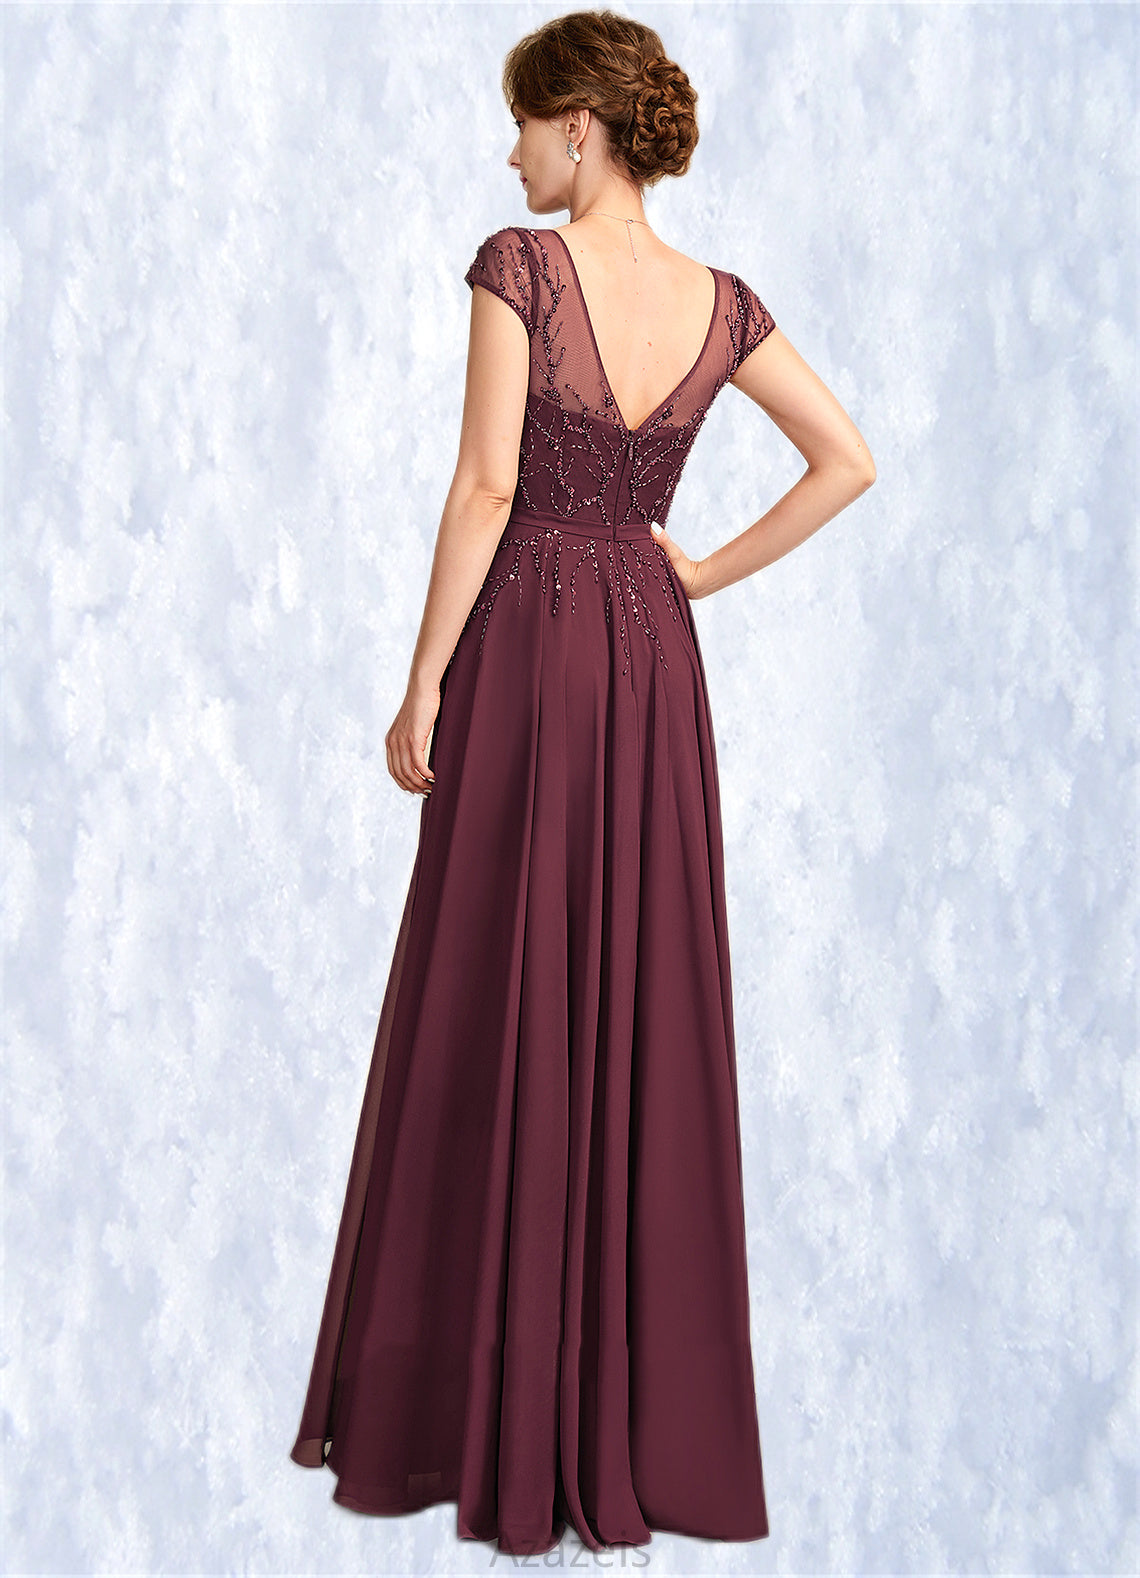 Kinsley A-Line V-neck Floor-Length Chiffon Mother of the Bride Dress With Beading Sequins DF126P0015028